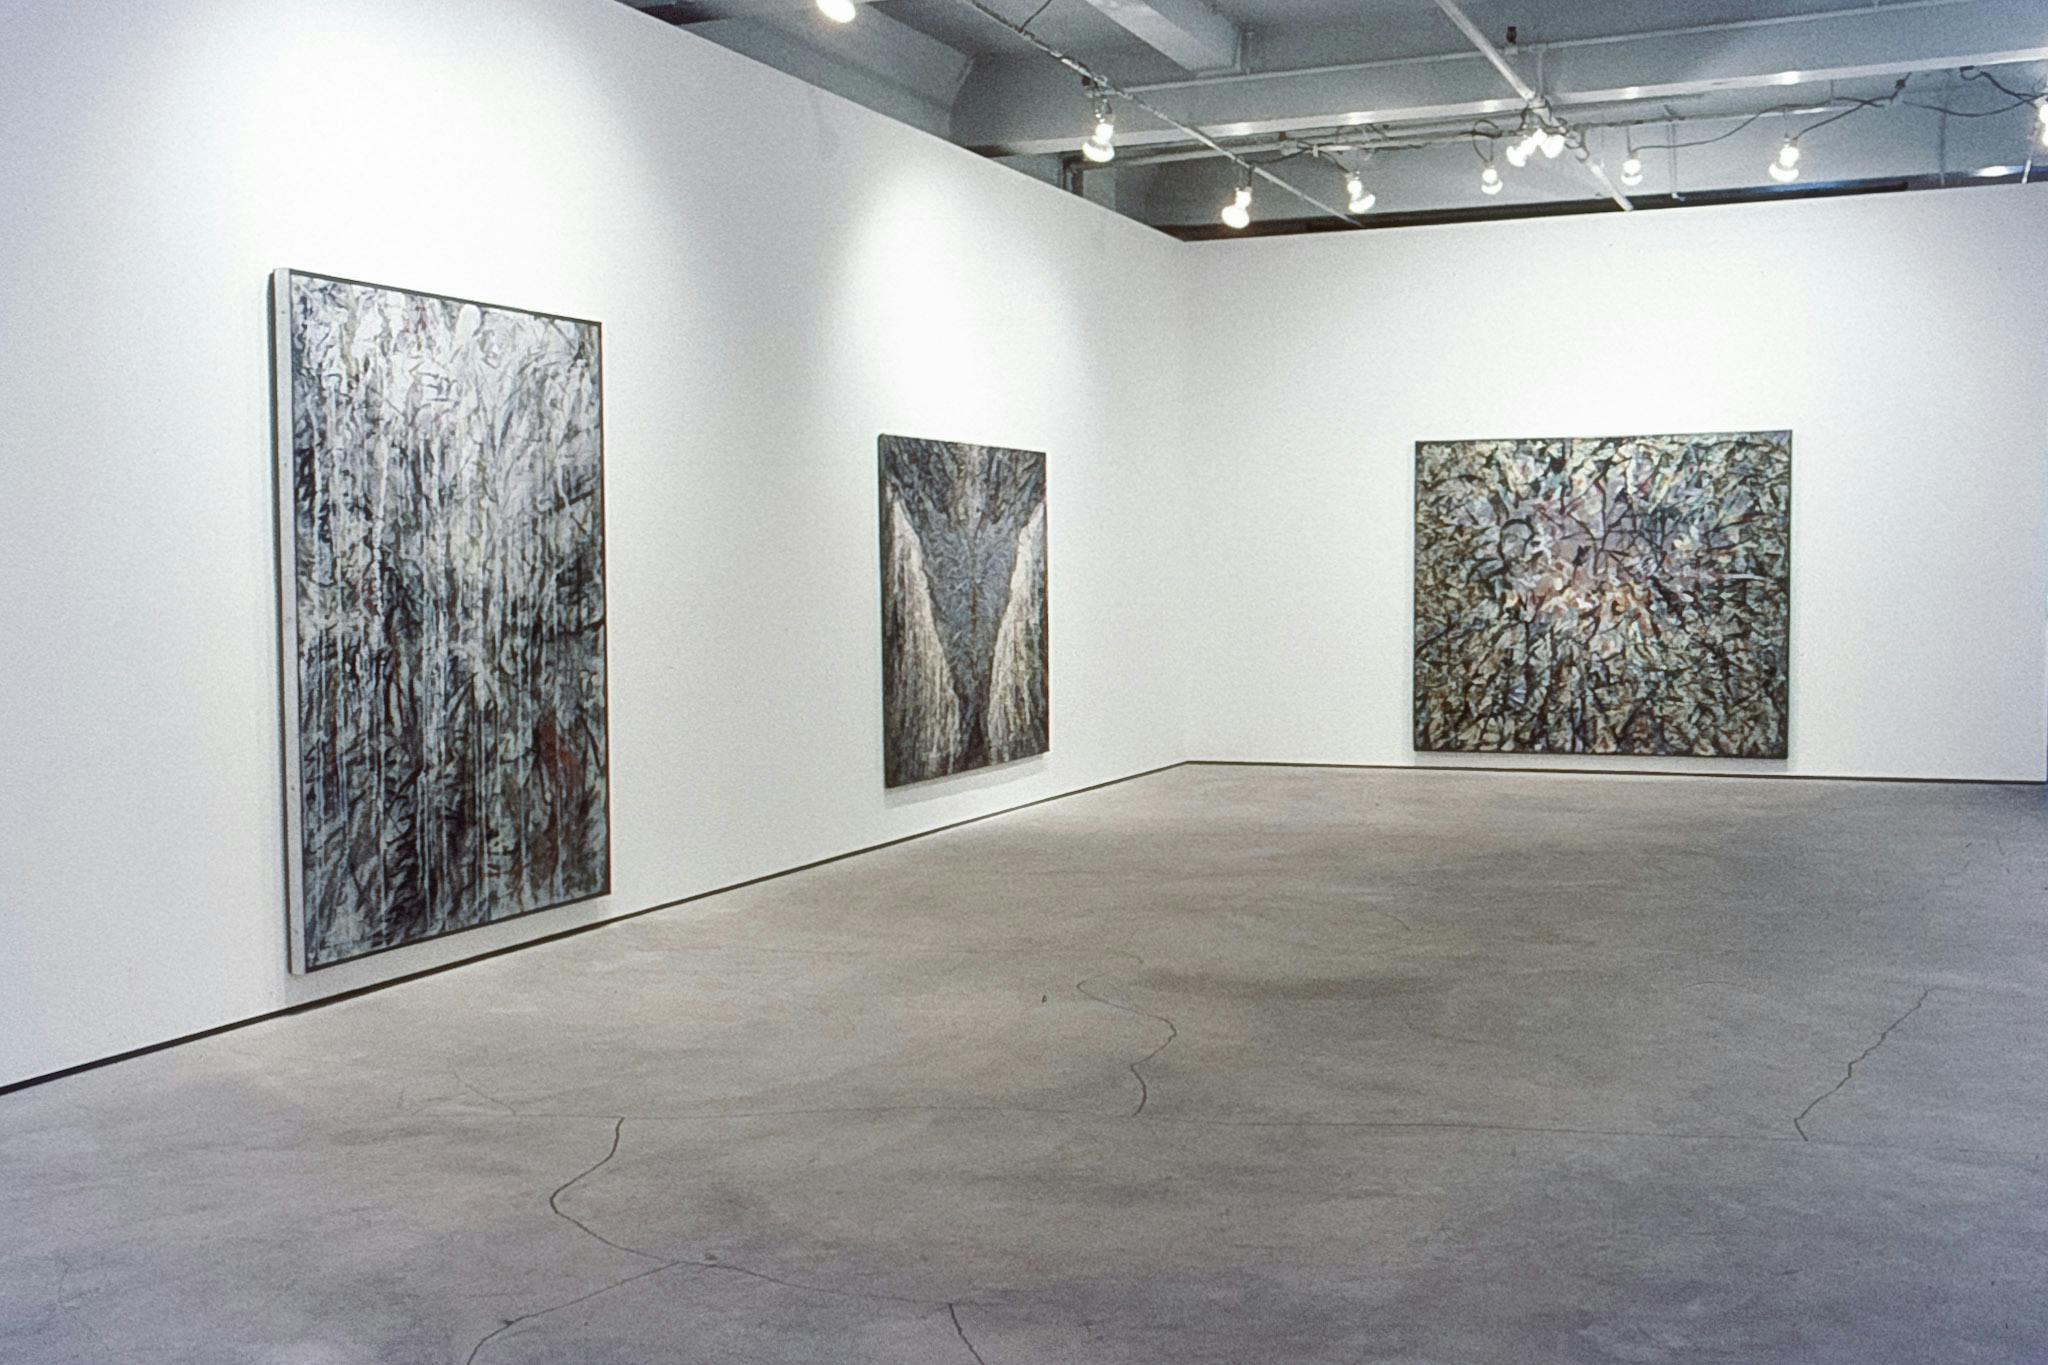 3 paintings on large canvases of different proportions, in a gallery. They have a splattered and swirled paint with different materials. The painting in the centre has an inverted triangle form in it.